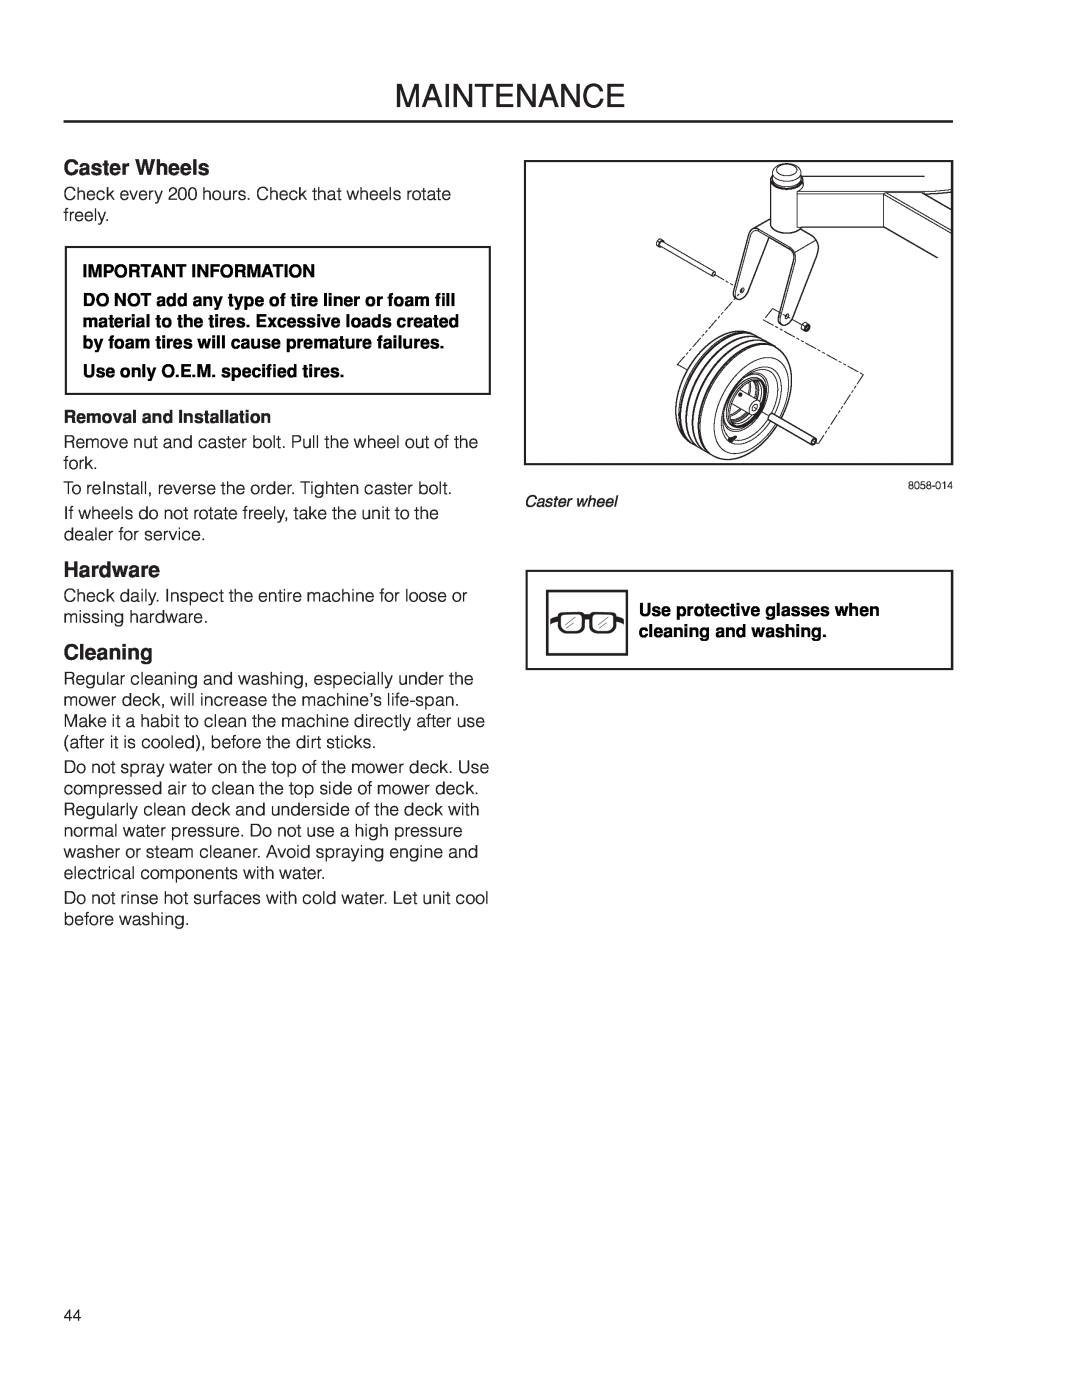 Husqvarna MZ6128/966613103 Caster Wheels, Hardware, Cleaning, Maintenance, Important Information, Removal and Installation 